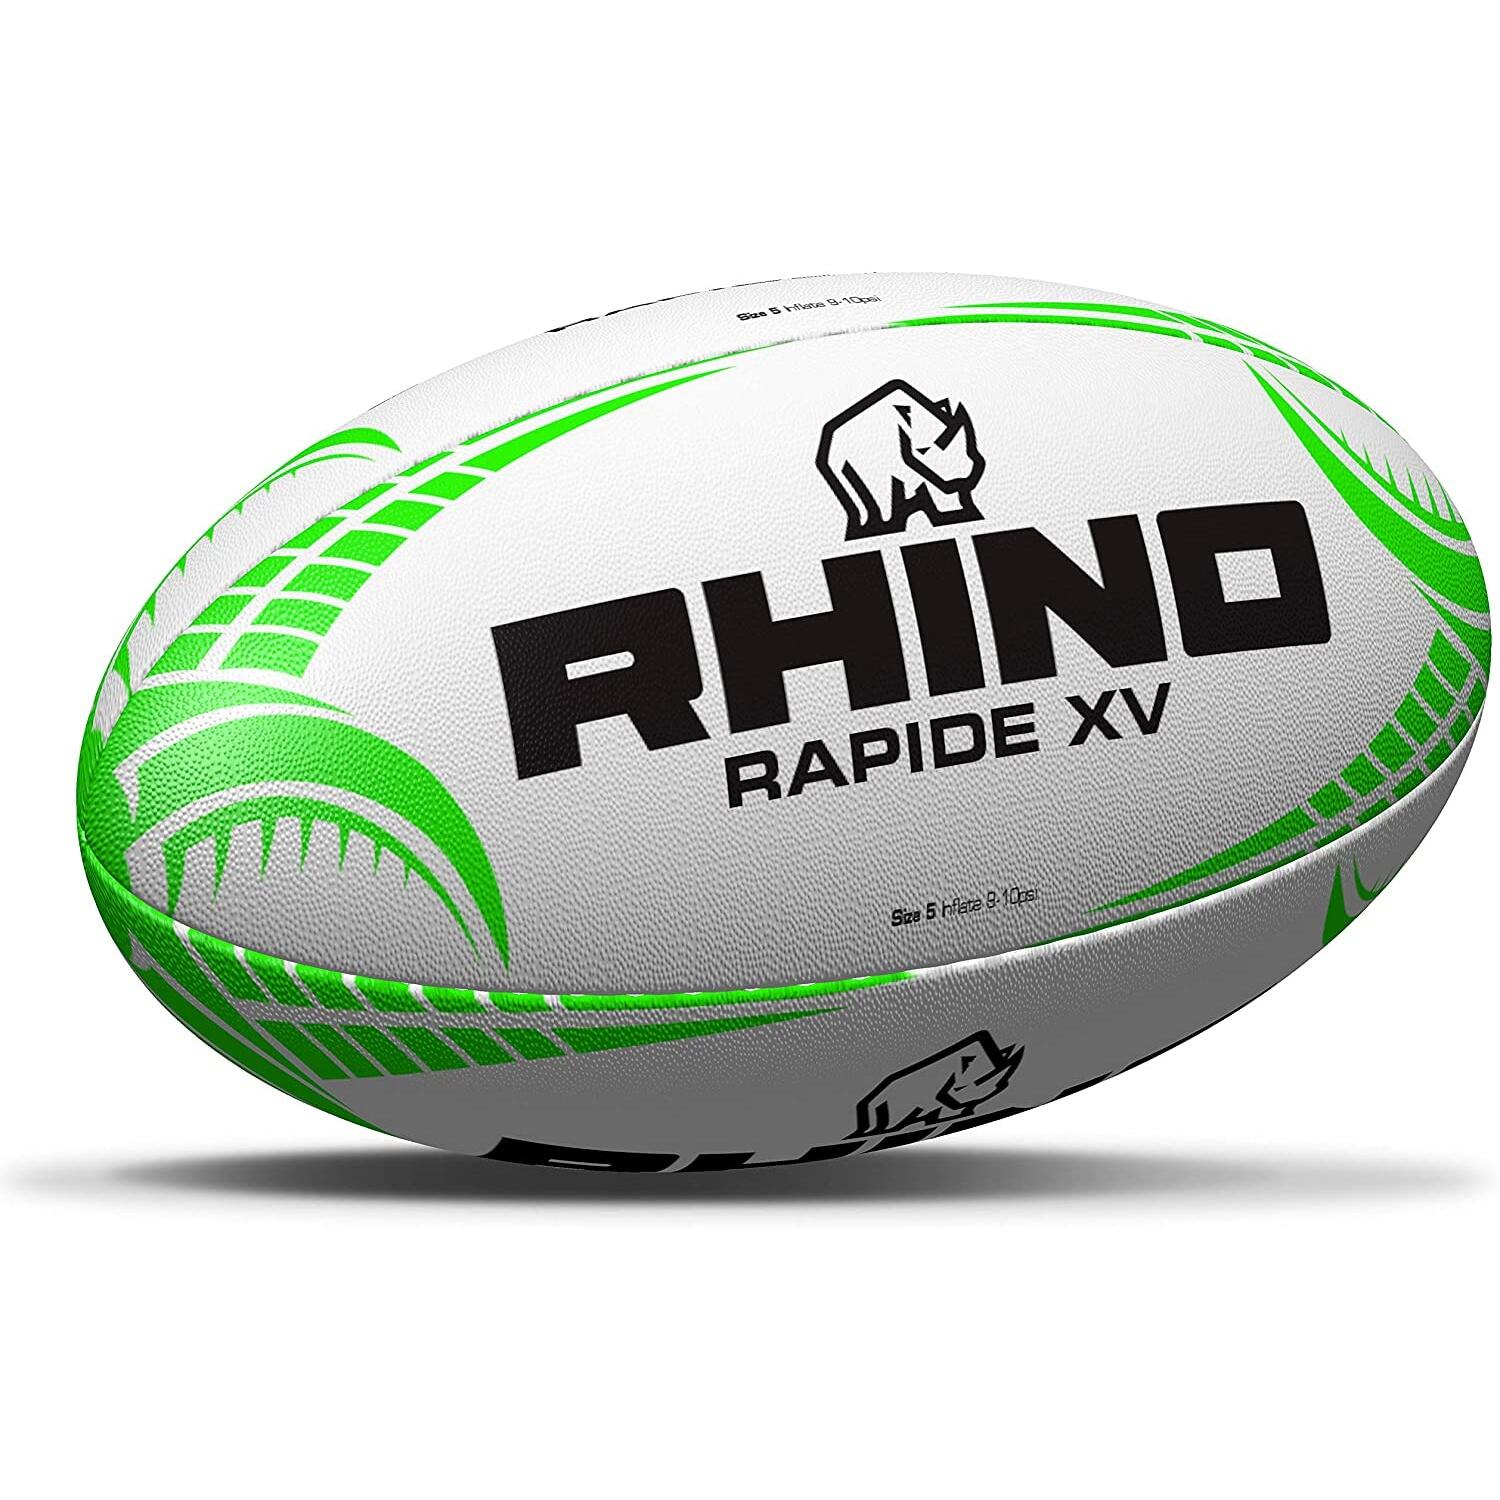 Rapide XV Rugby Ball (White/Green) 2/4